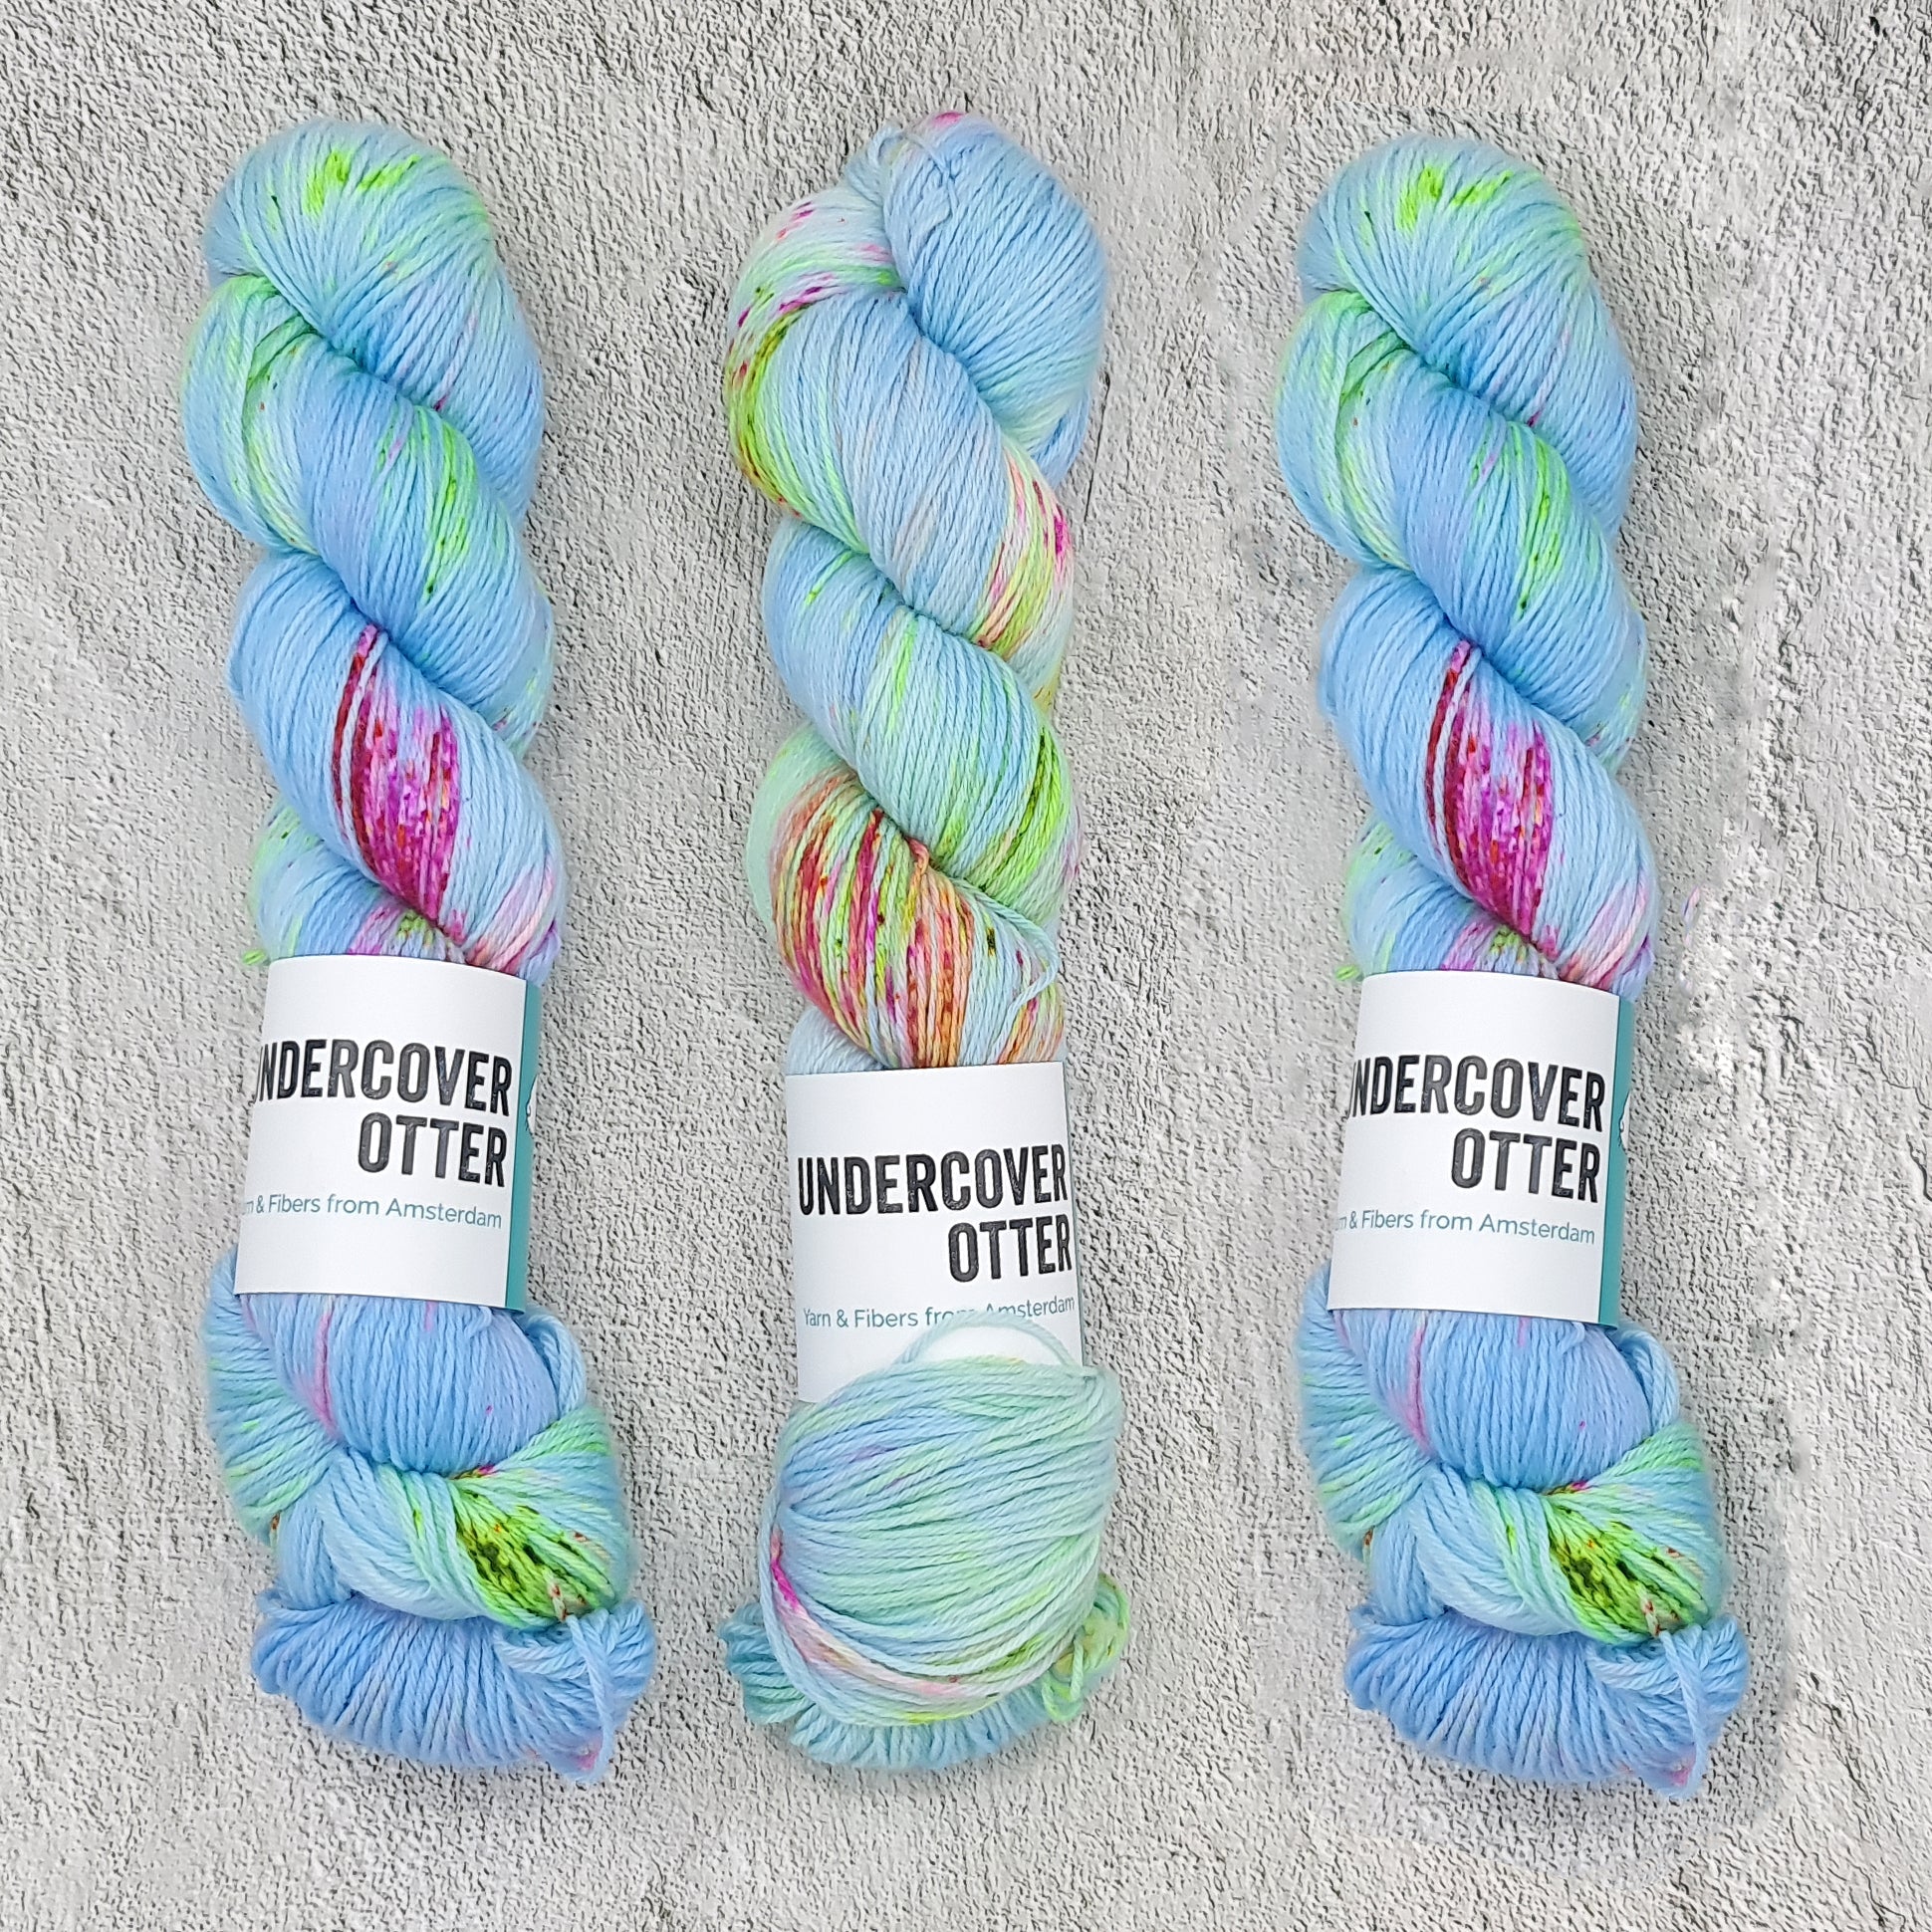 Wicked Little Things - Squirm Sock - Undercover Otter